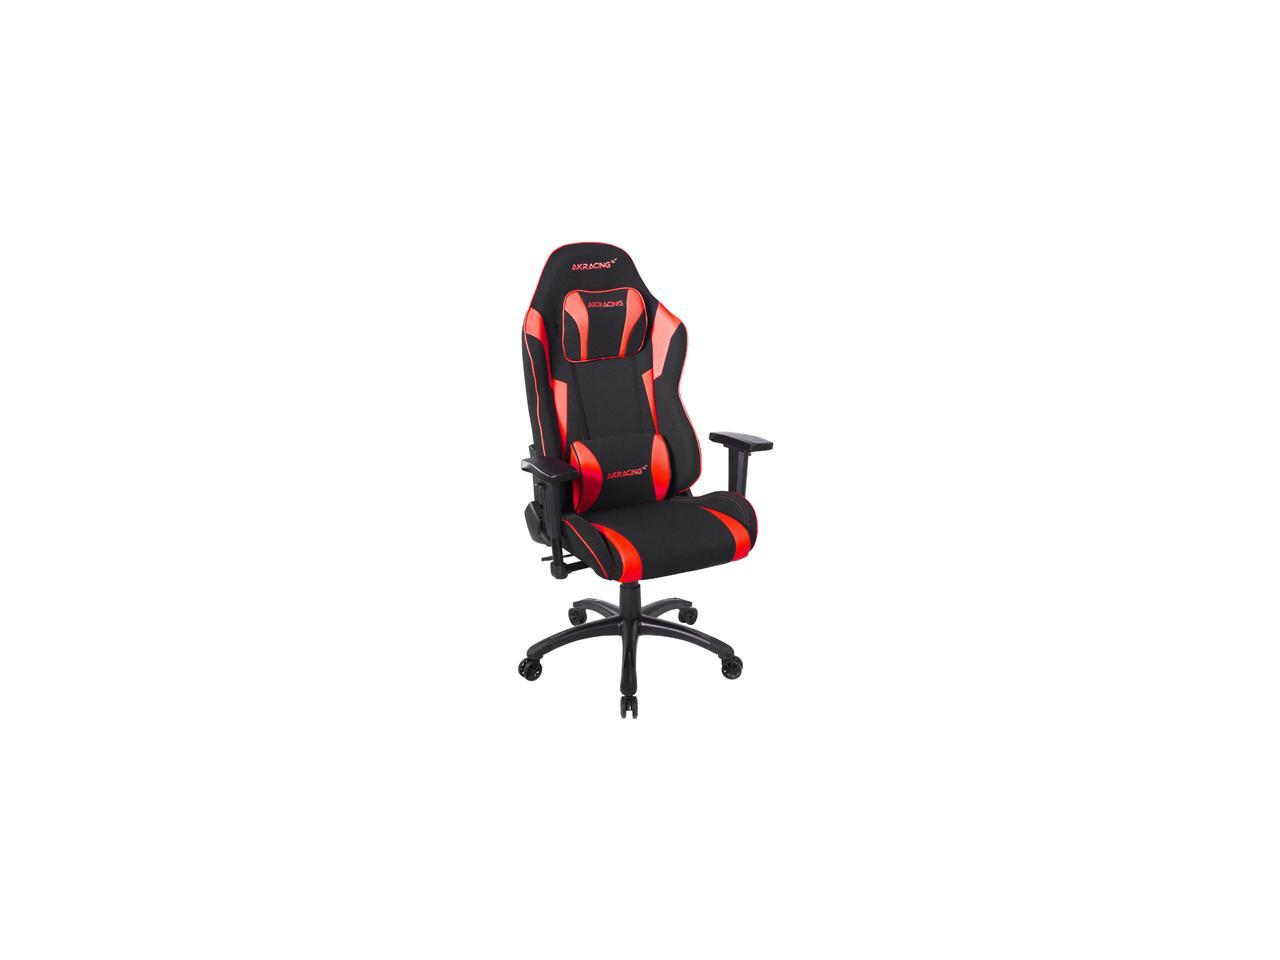 AKRACING AK-EX-SE-RD Core Series EX SE Gaming Chair, Red, Fabric, 3D Adjustable Armrests, 180-degree Recline